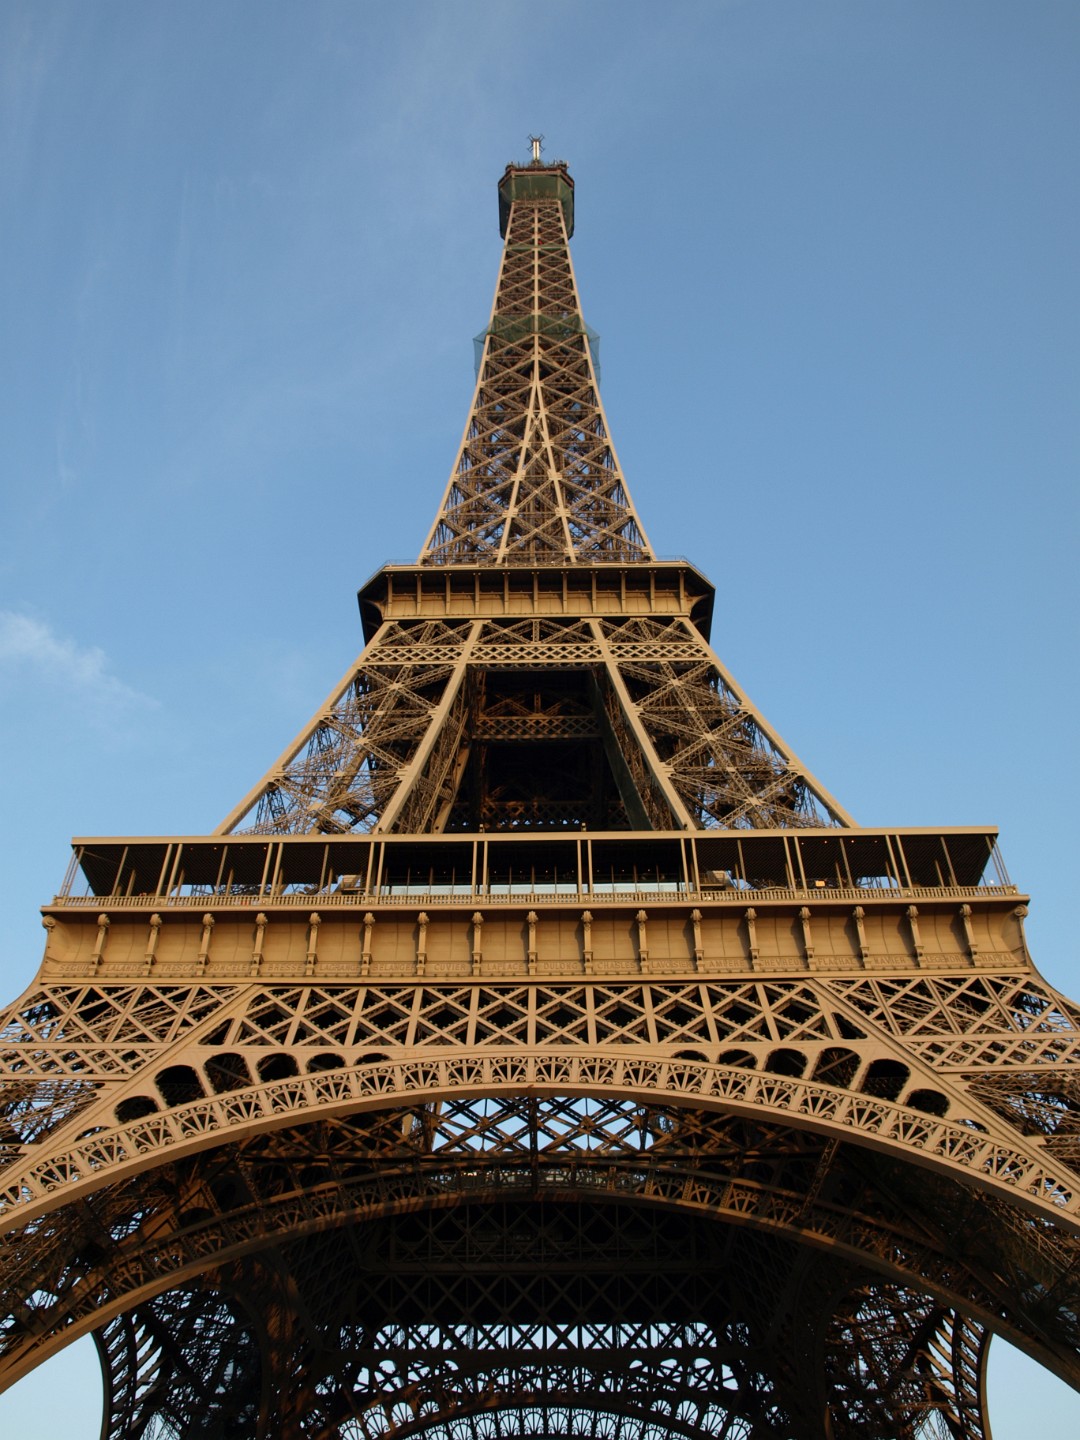 The Tour Eiffel is Somewhat Tall